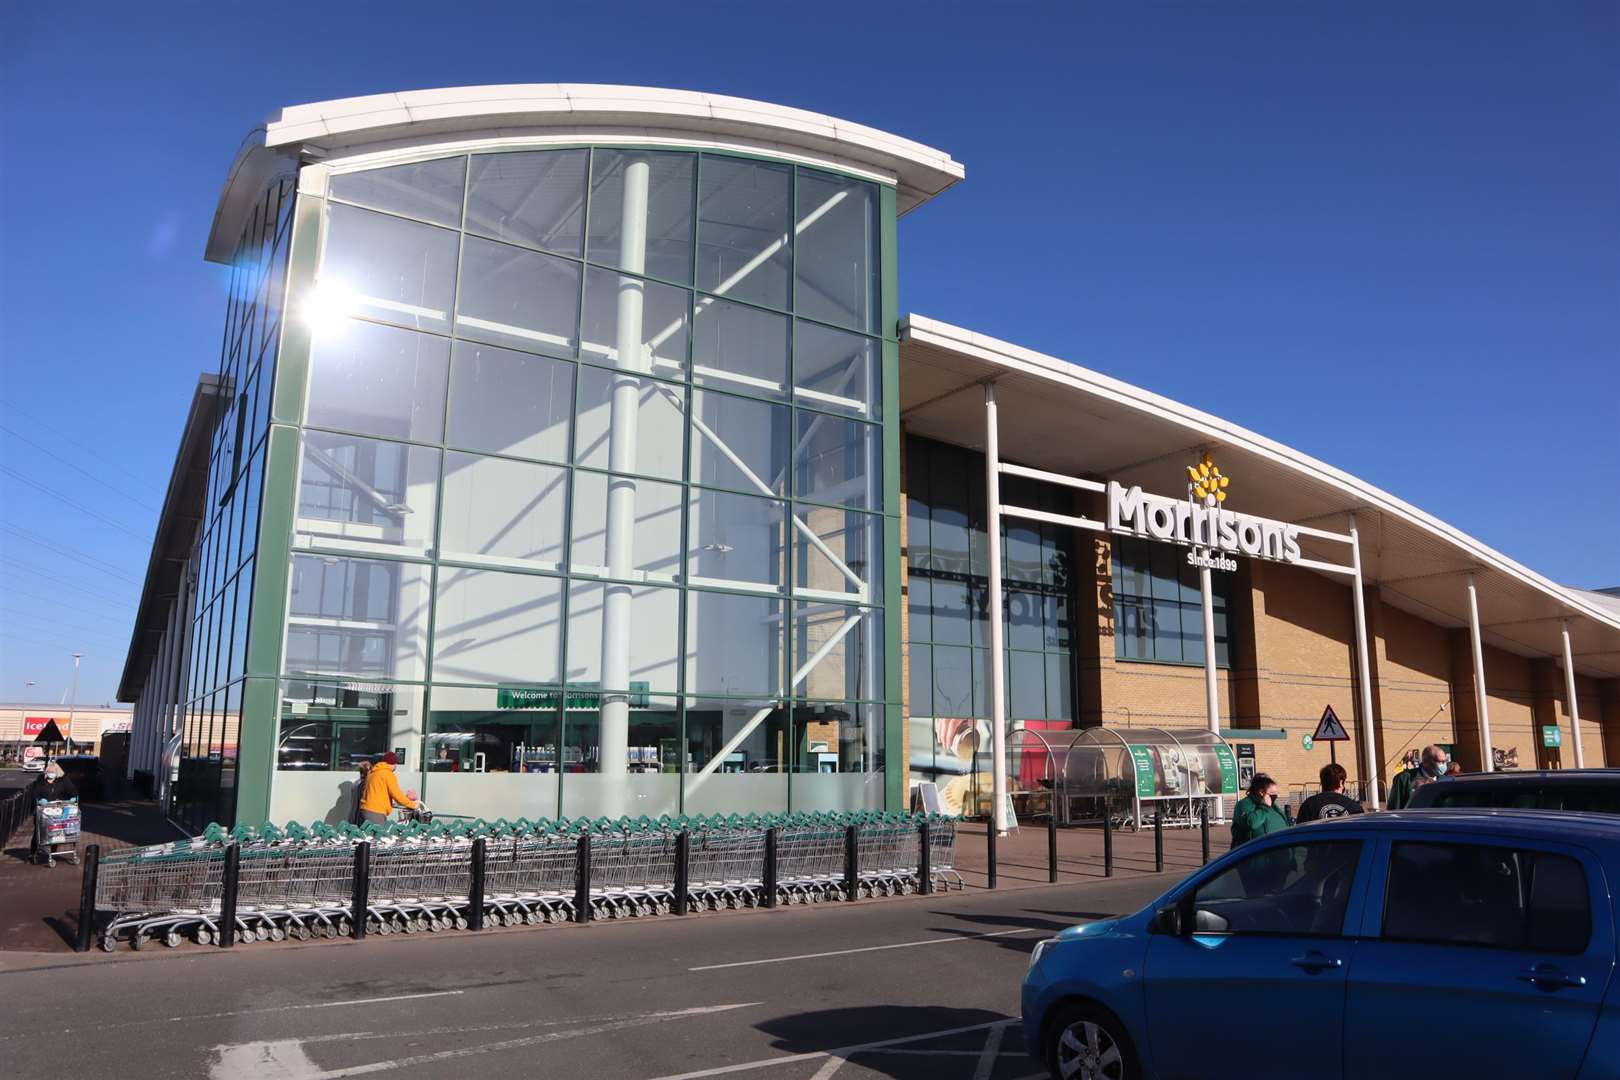 The email, pretending to be from Morrisons, offers to enter customers into a free prize draw